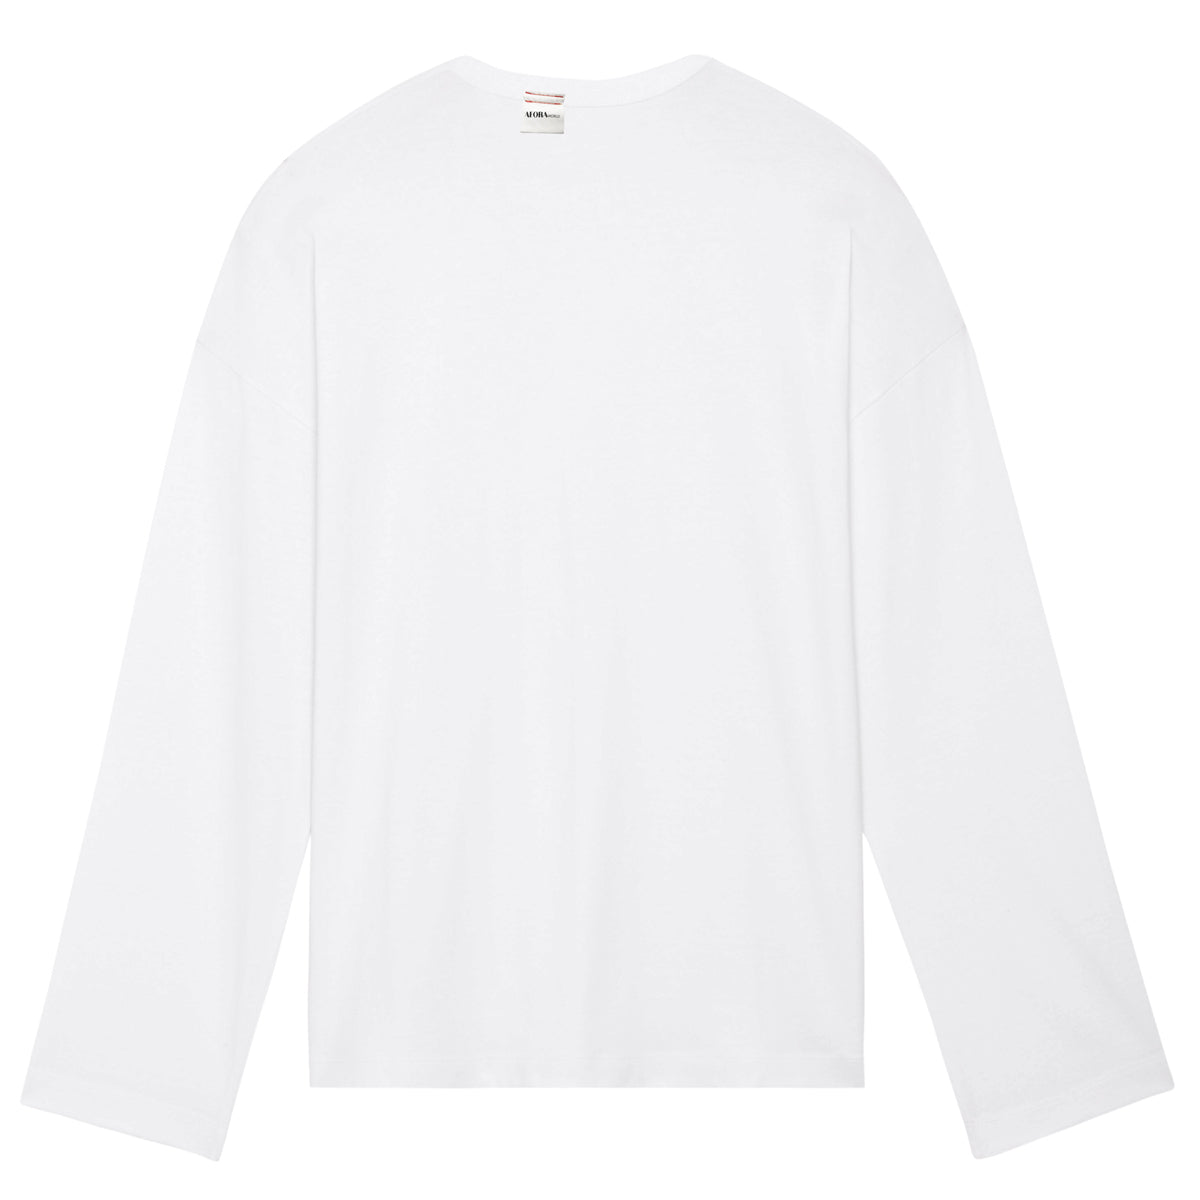 "no Plastic" Long Sleeve in white